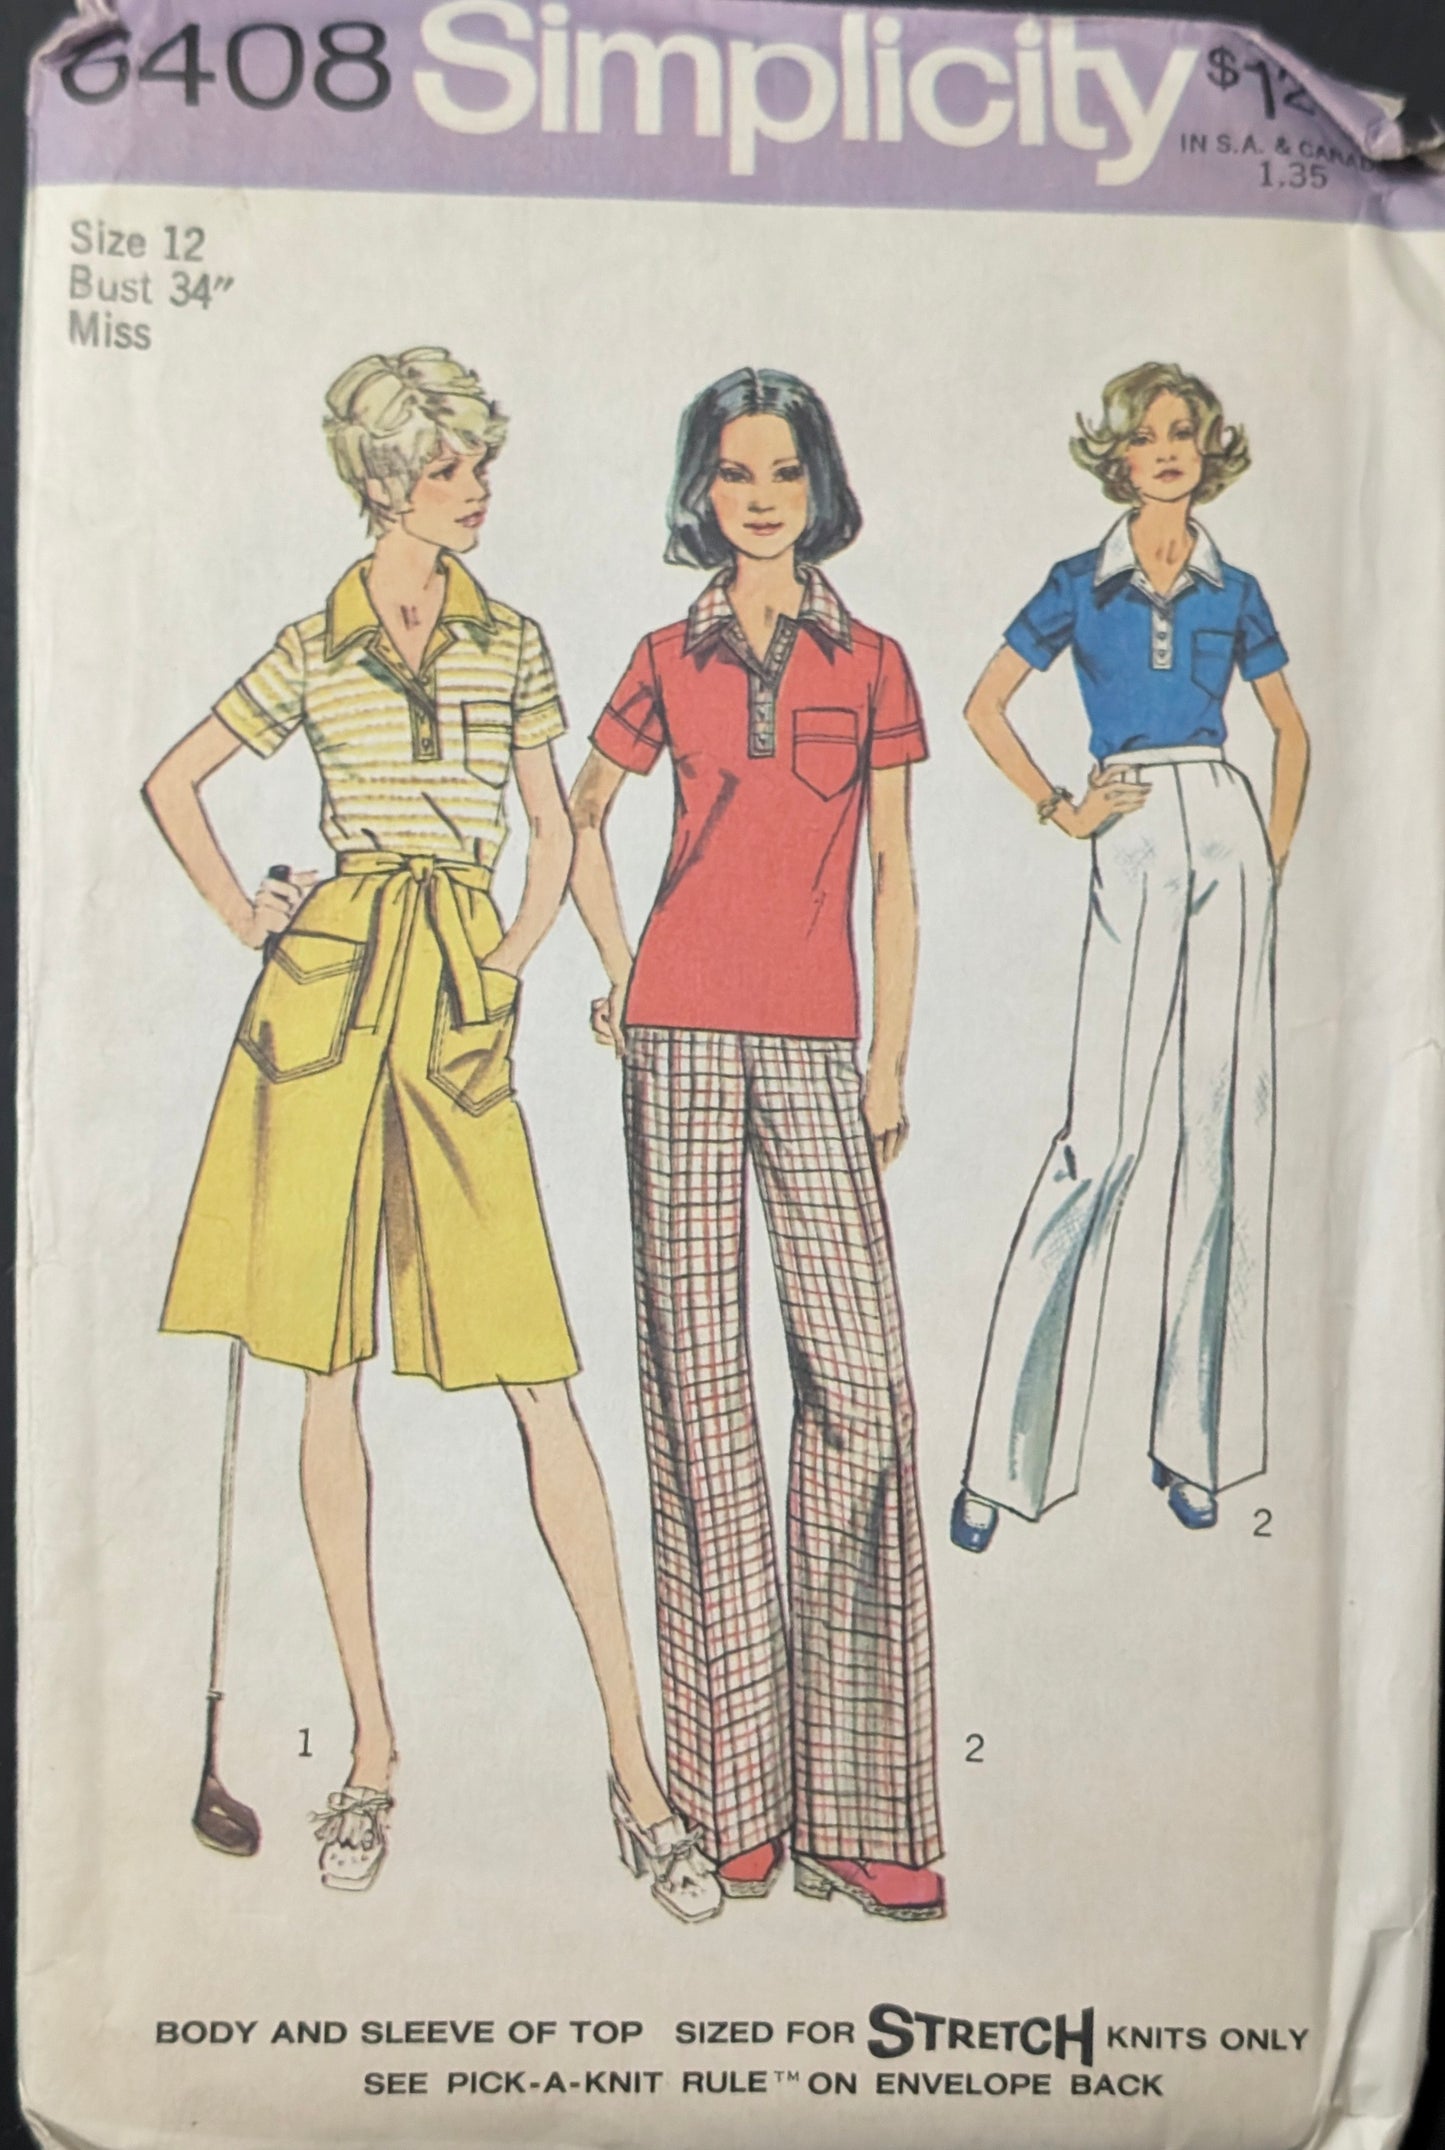 1960s - 1970s Original Vintage Sewing Pattern: Simplicity 6408 Size 12